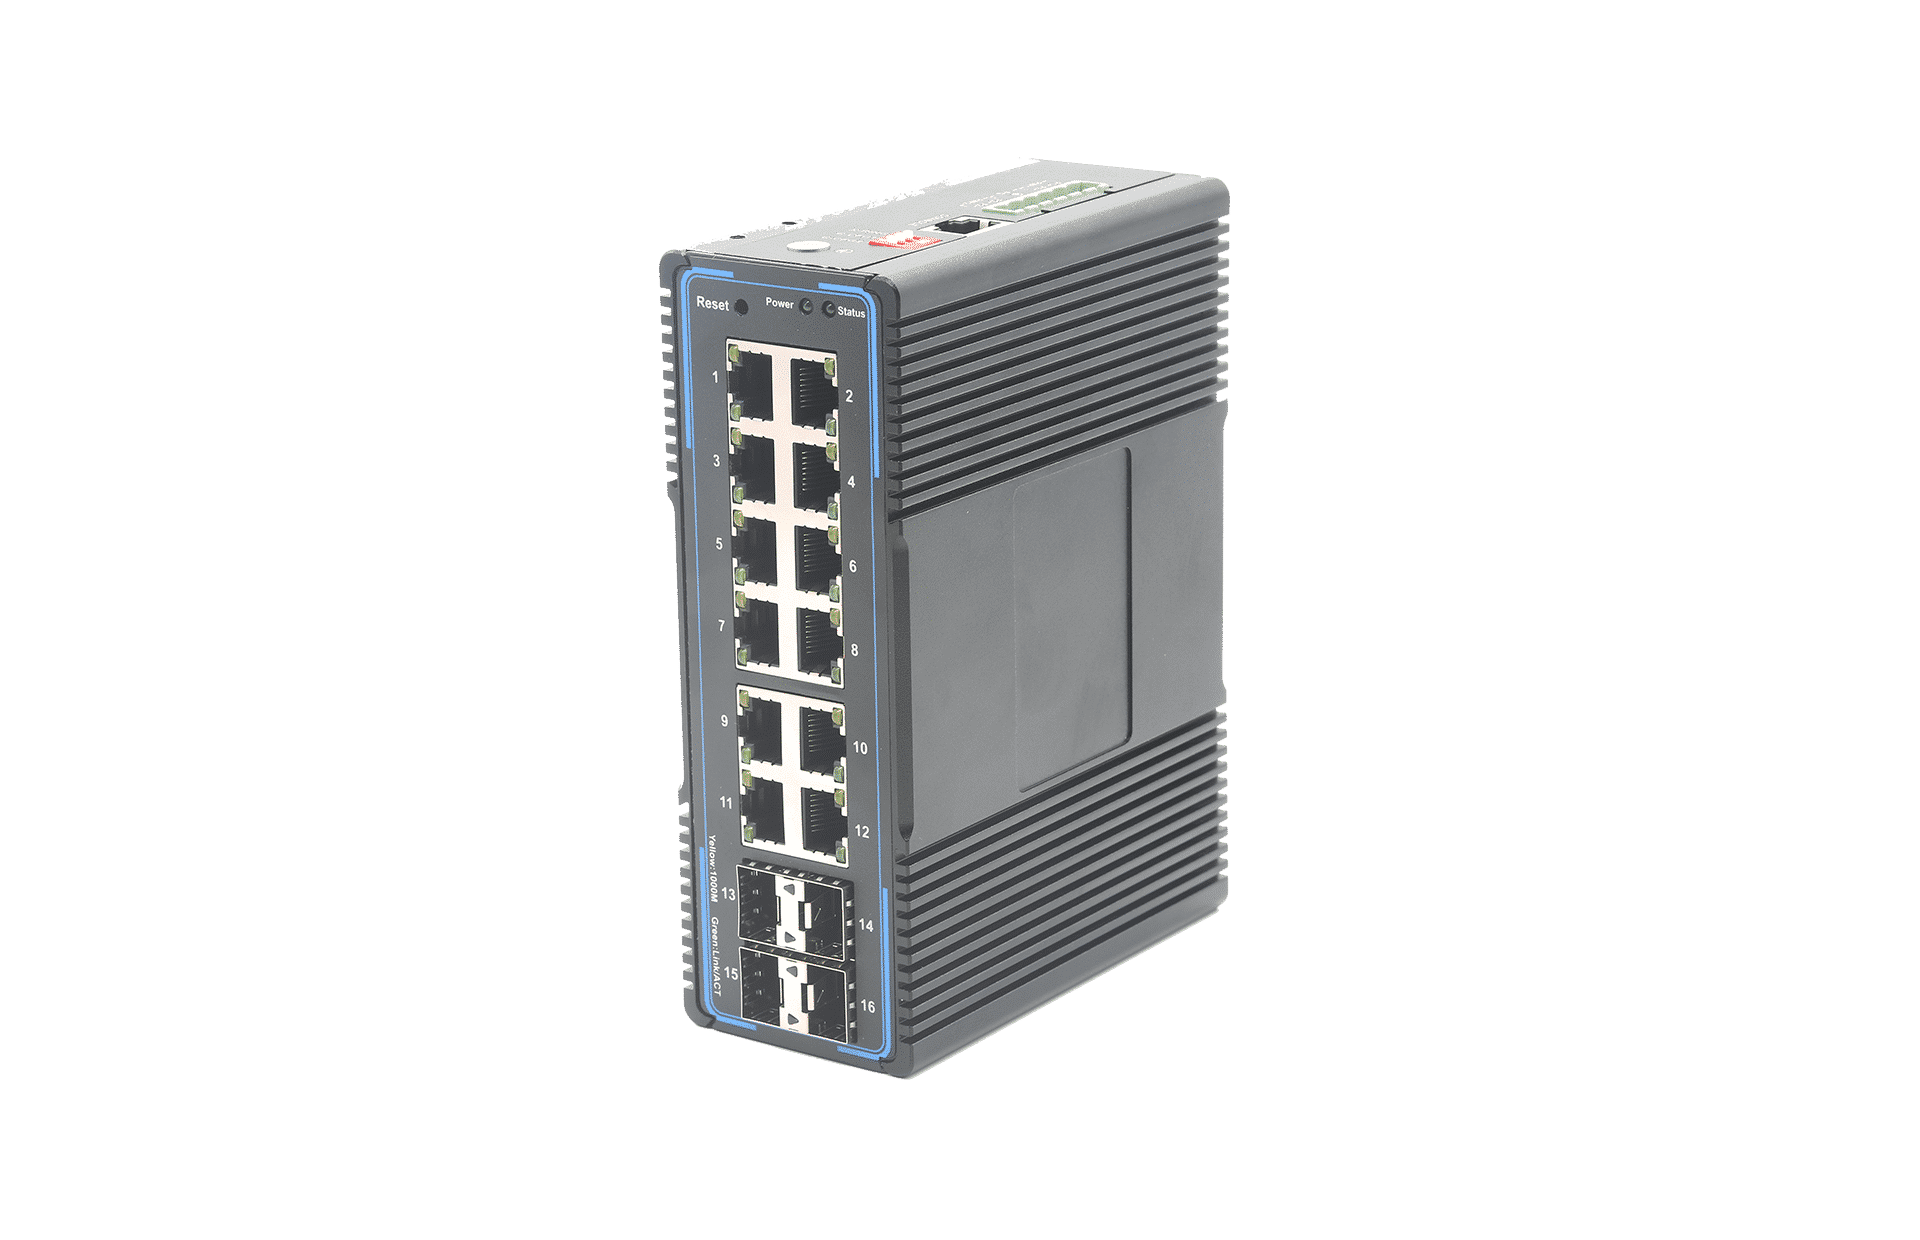 12 Ports 10/100/1000Mbps RJ45 and 4 Gigabit SFP Managed Industrial Switch